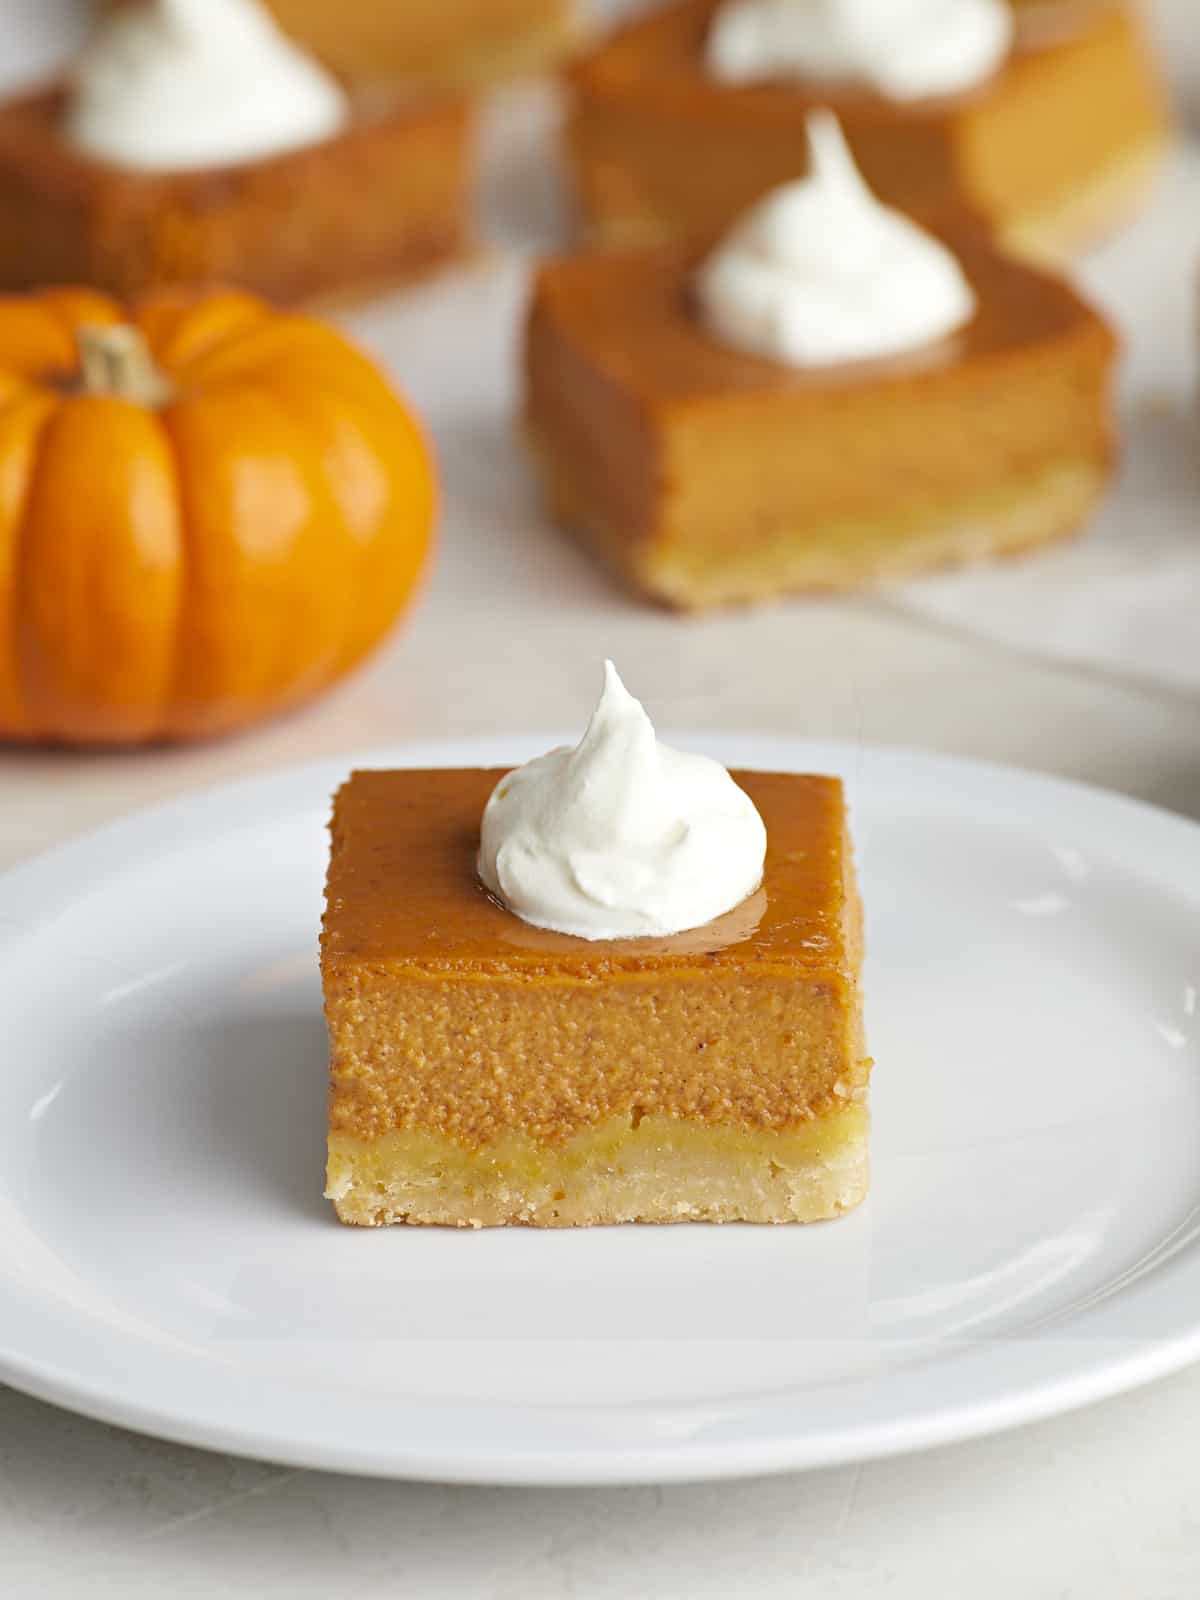 Side view of a pumpkin pie bar on a white plate with whipped cream on top.